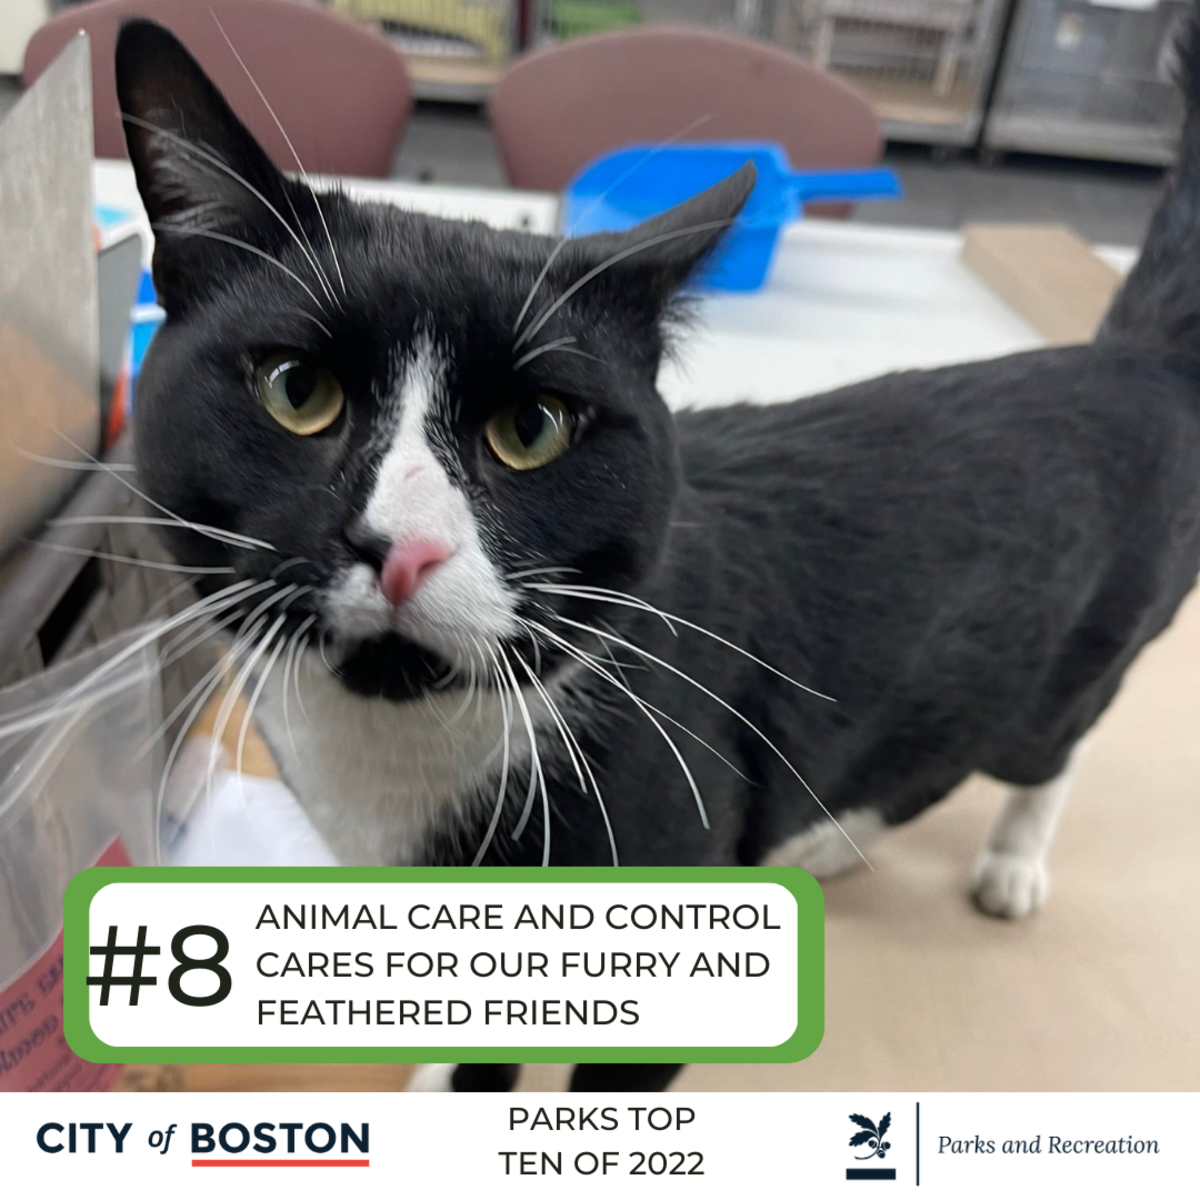 Parks Top Ten of 2022 #8 Animal care and control cares for our furry and feathered friends. A cat looking at the camera.